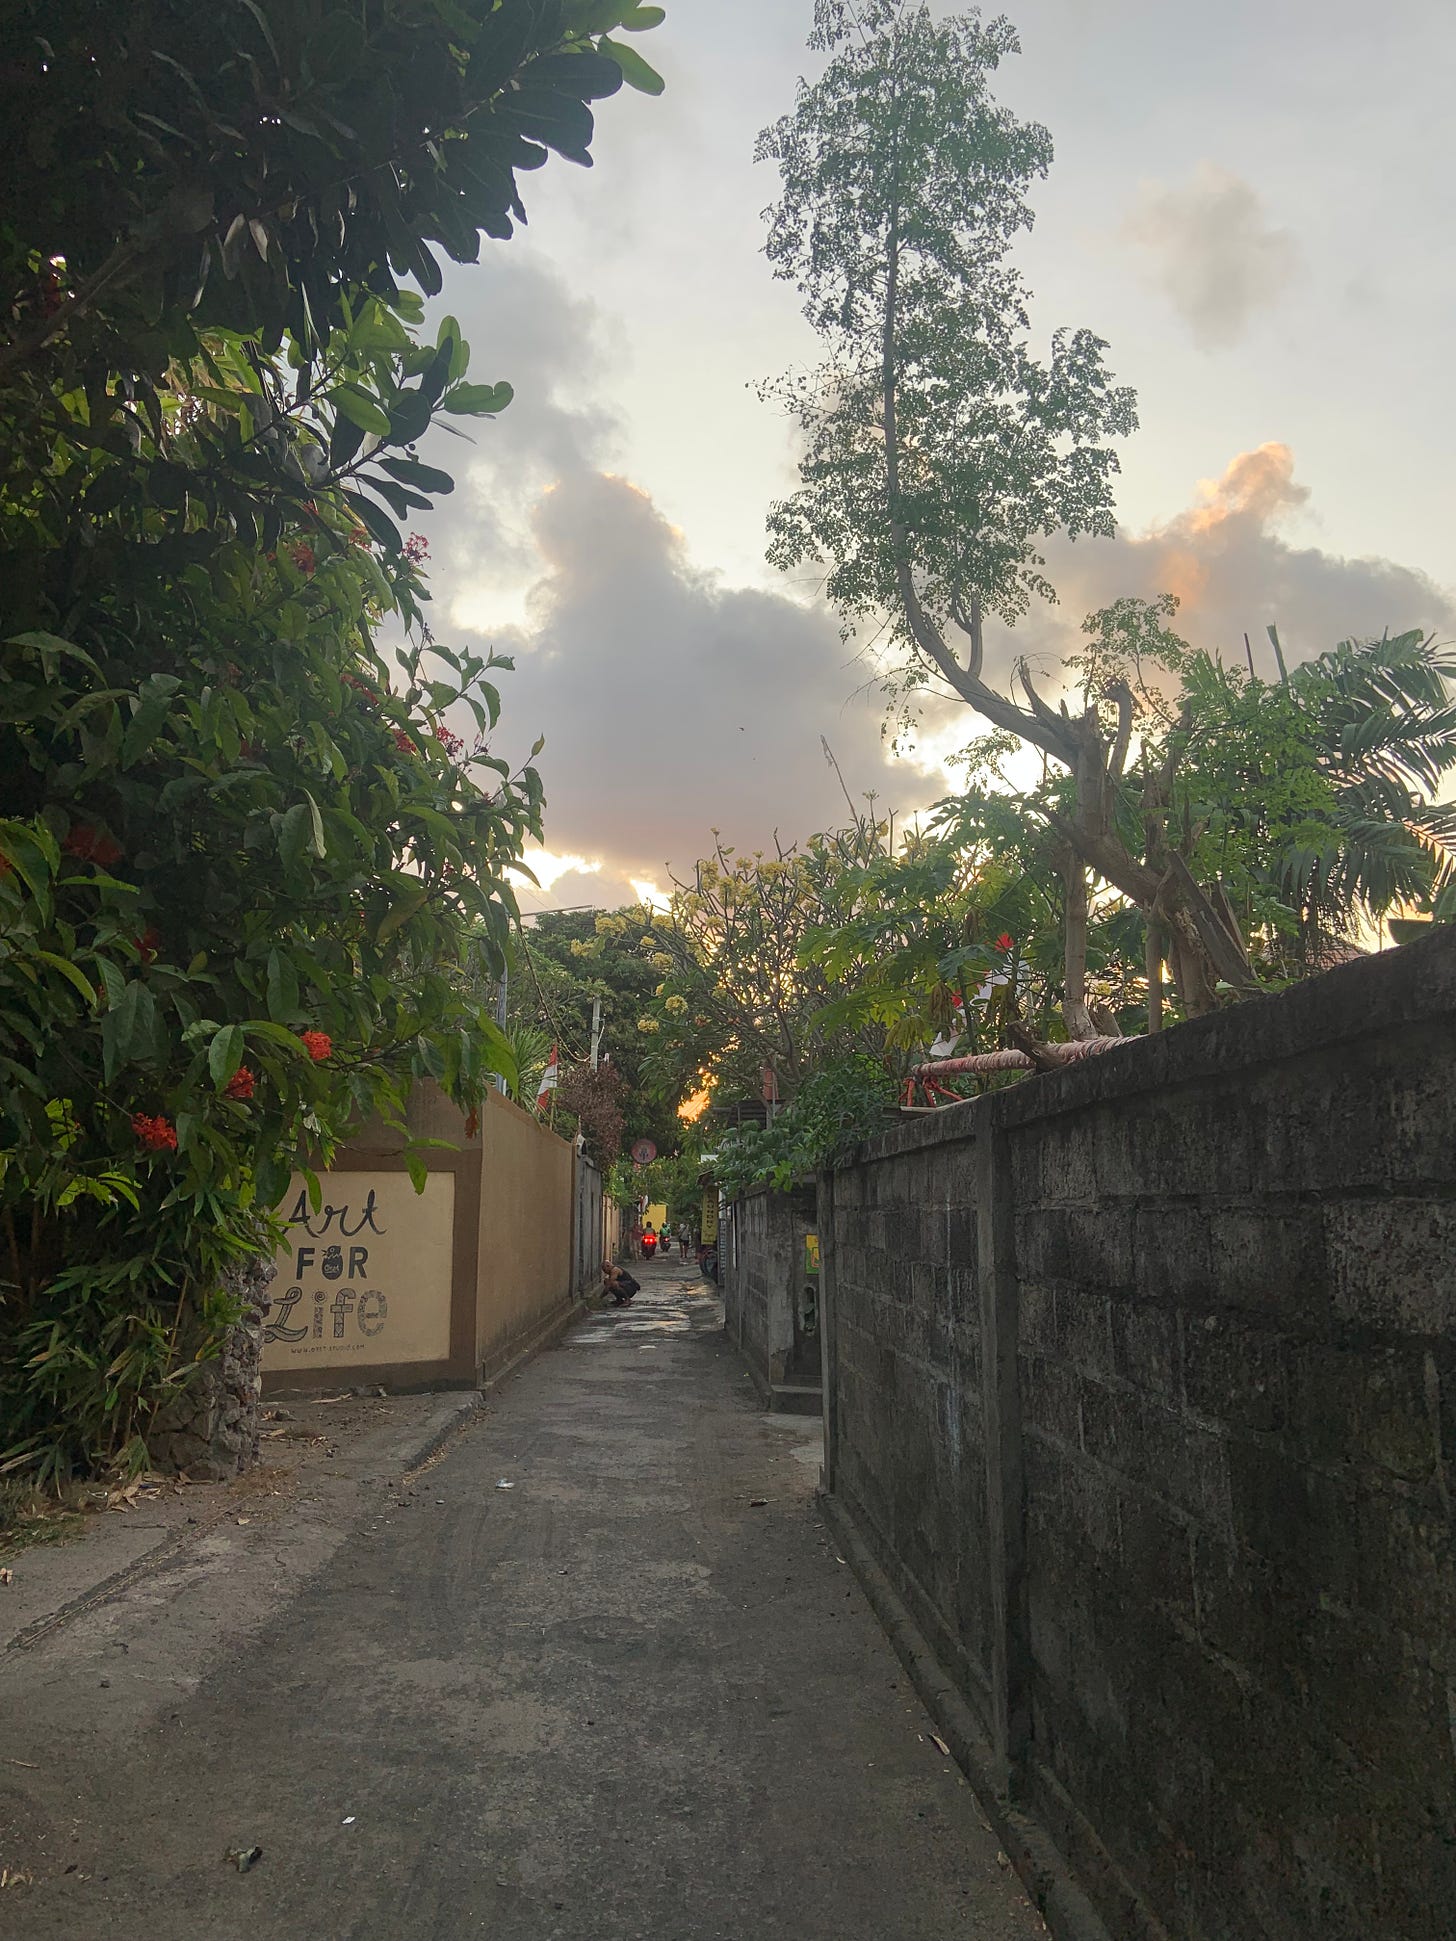 Narrow Bali road with paved cement, tall trees, and moto